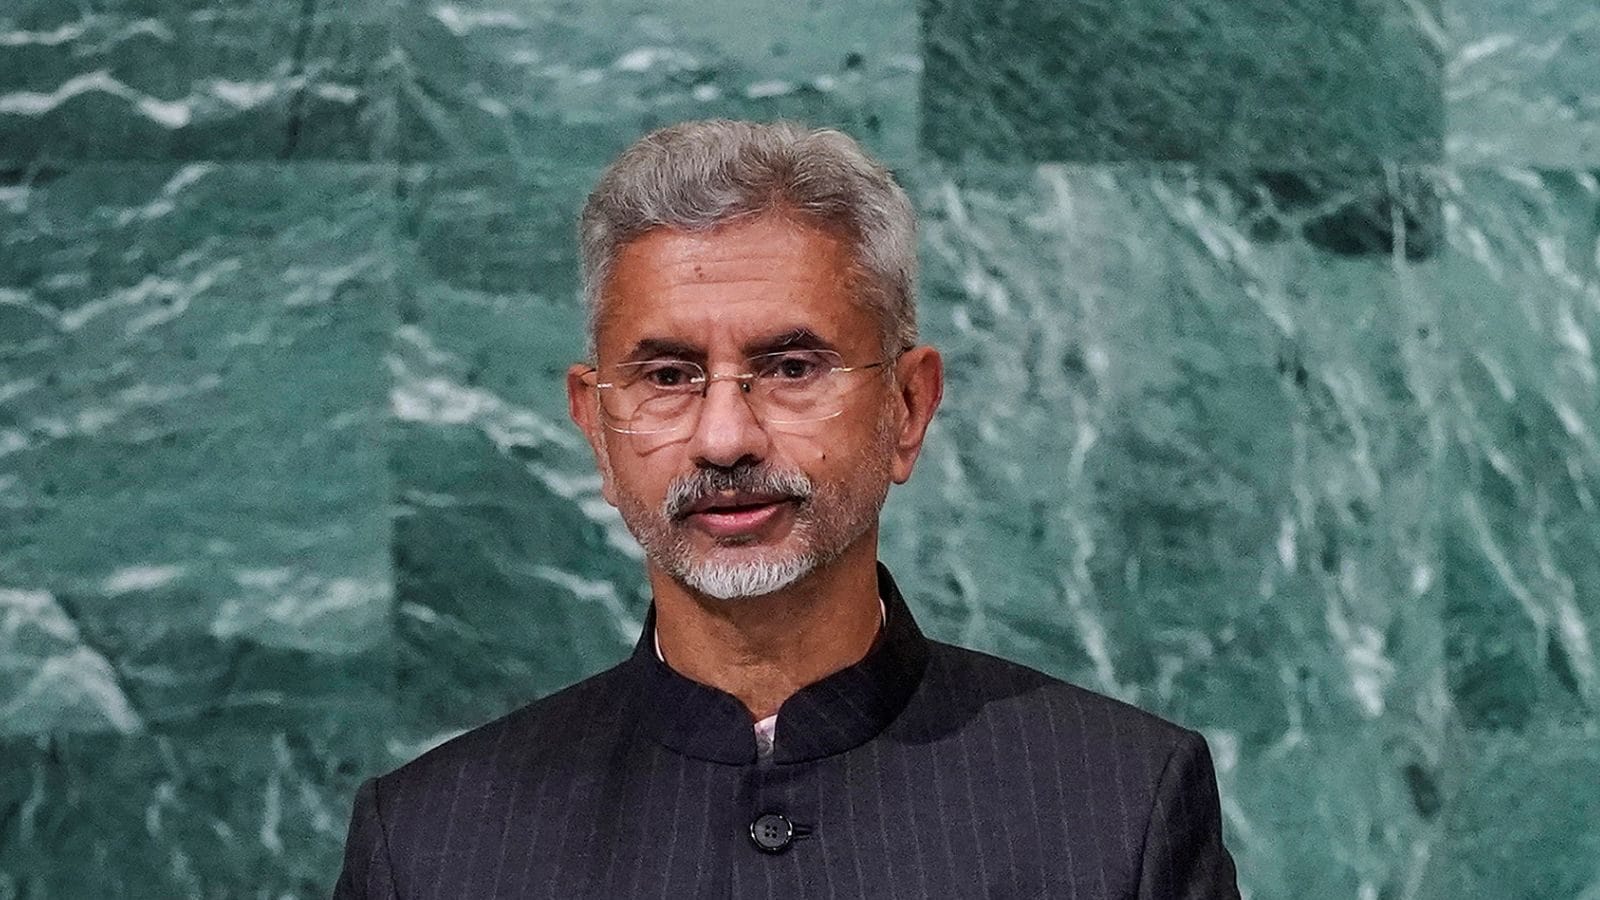 Today The World Sees India As A Country Which Contributes to Solving Global Problems, Says Jaishankar